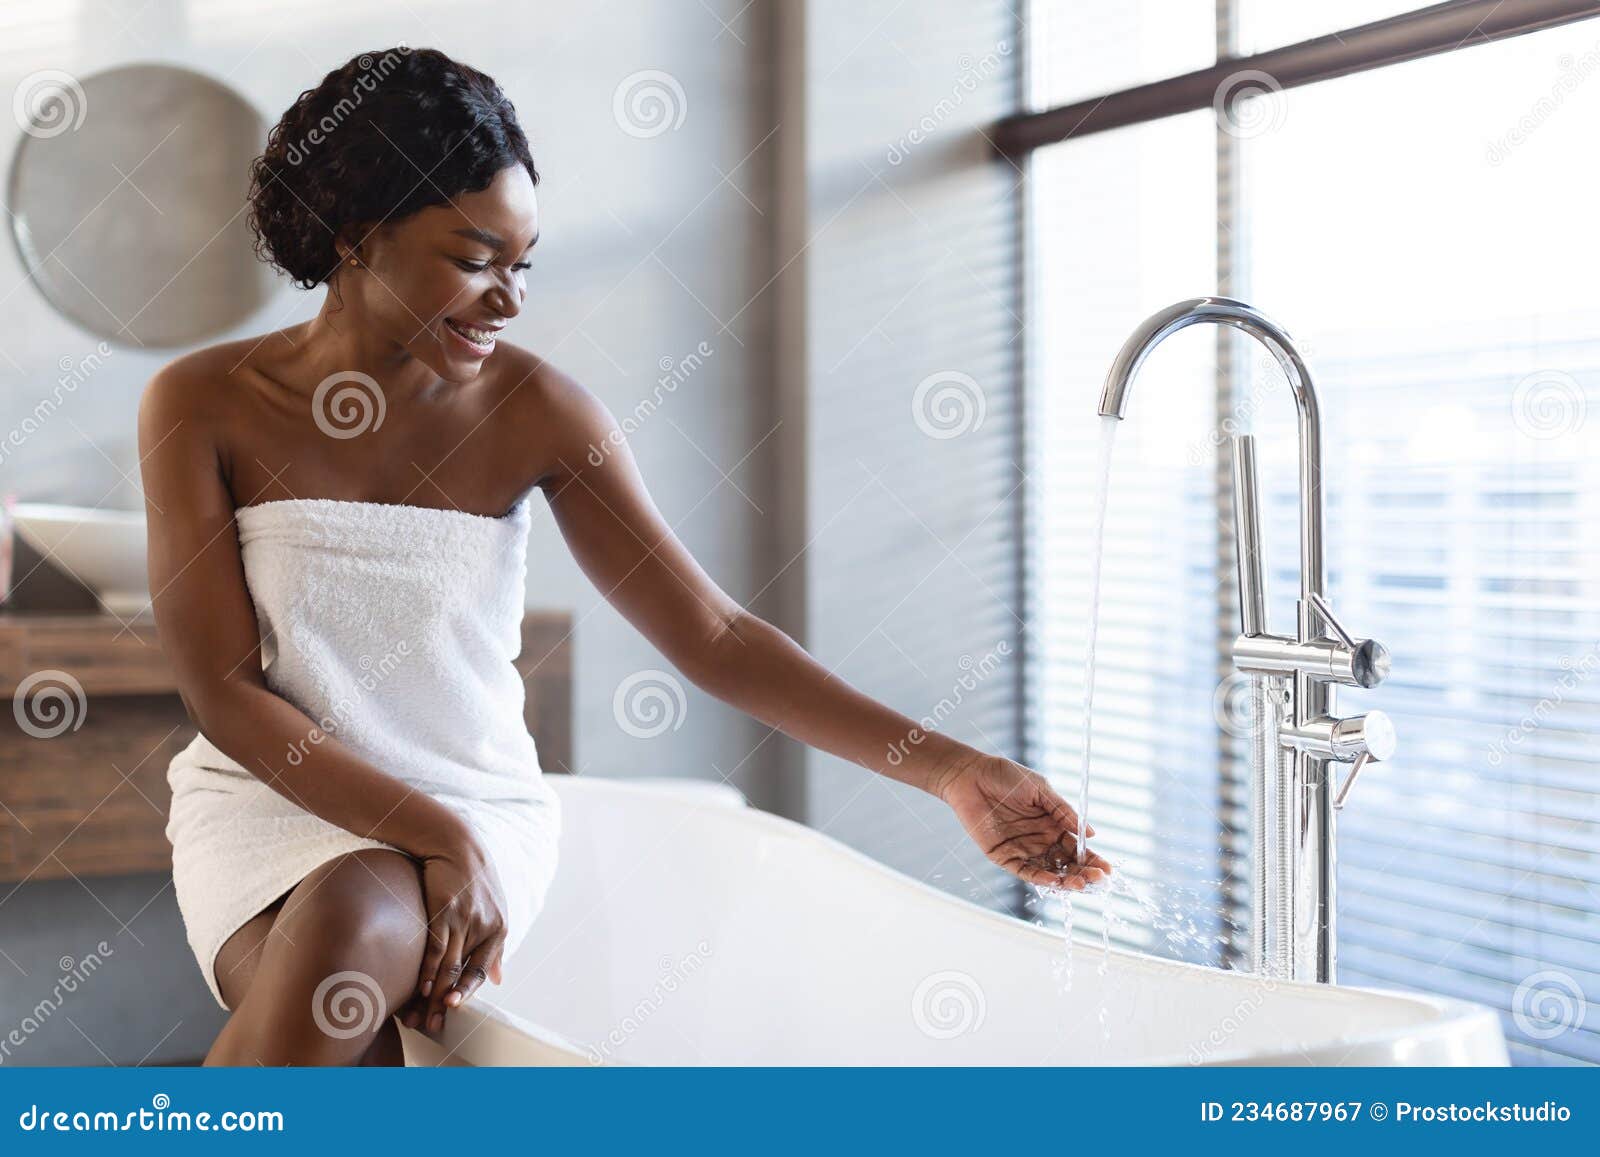 Young Black Woman Preparing To Take a Bath in Bathroom Stock Image